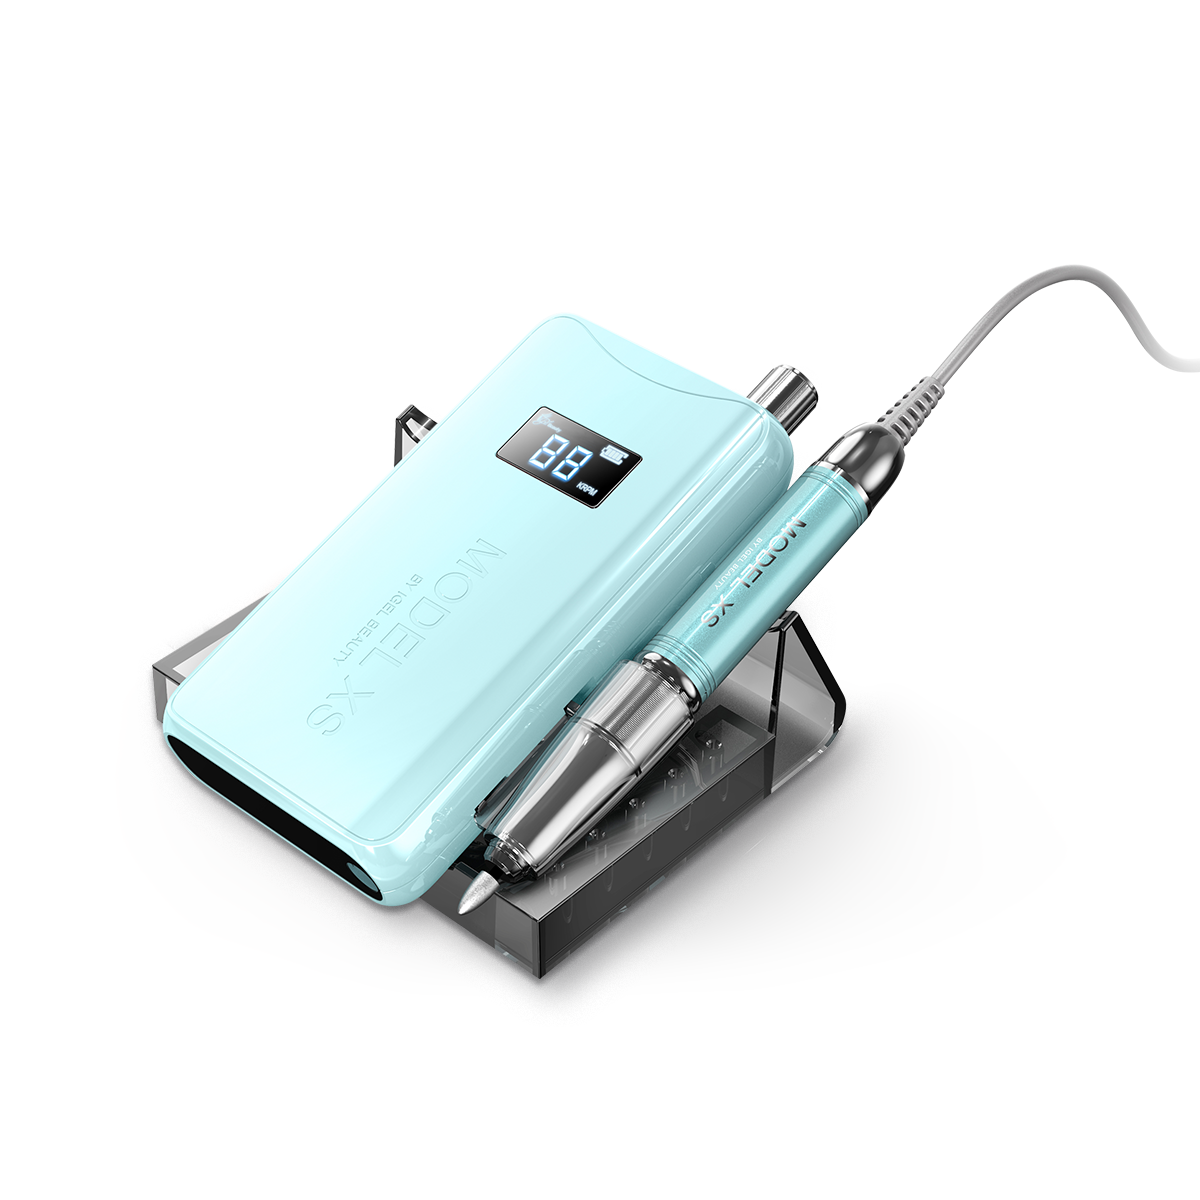 MODEL XS 2.0 Wireless Rechargeable e-File - Teal